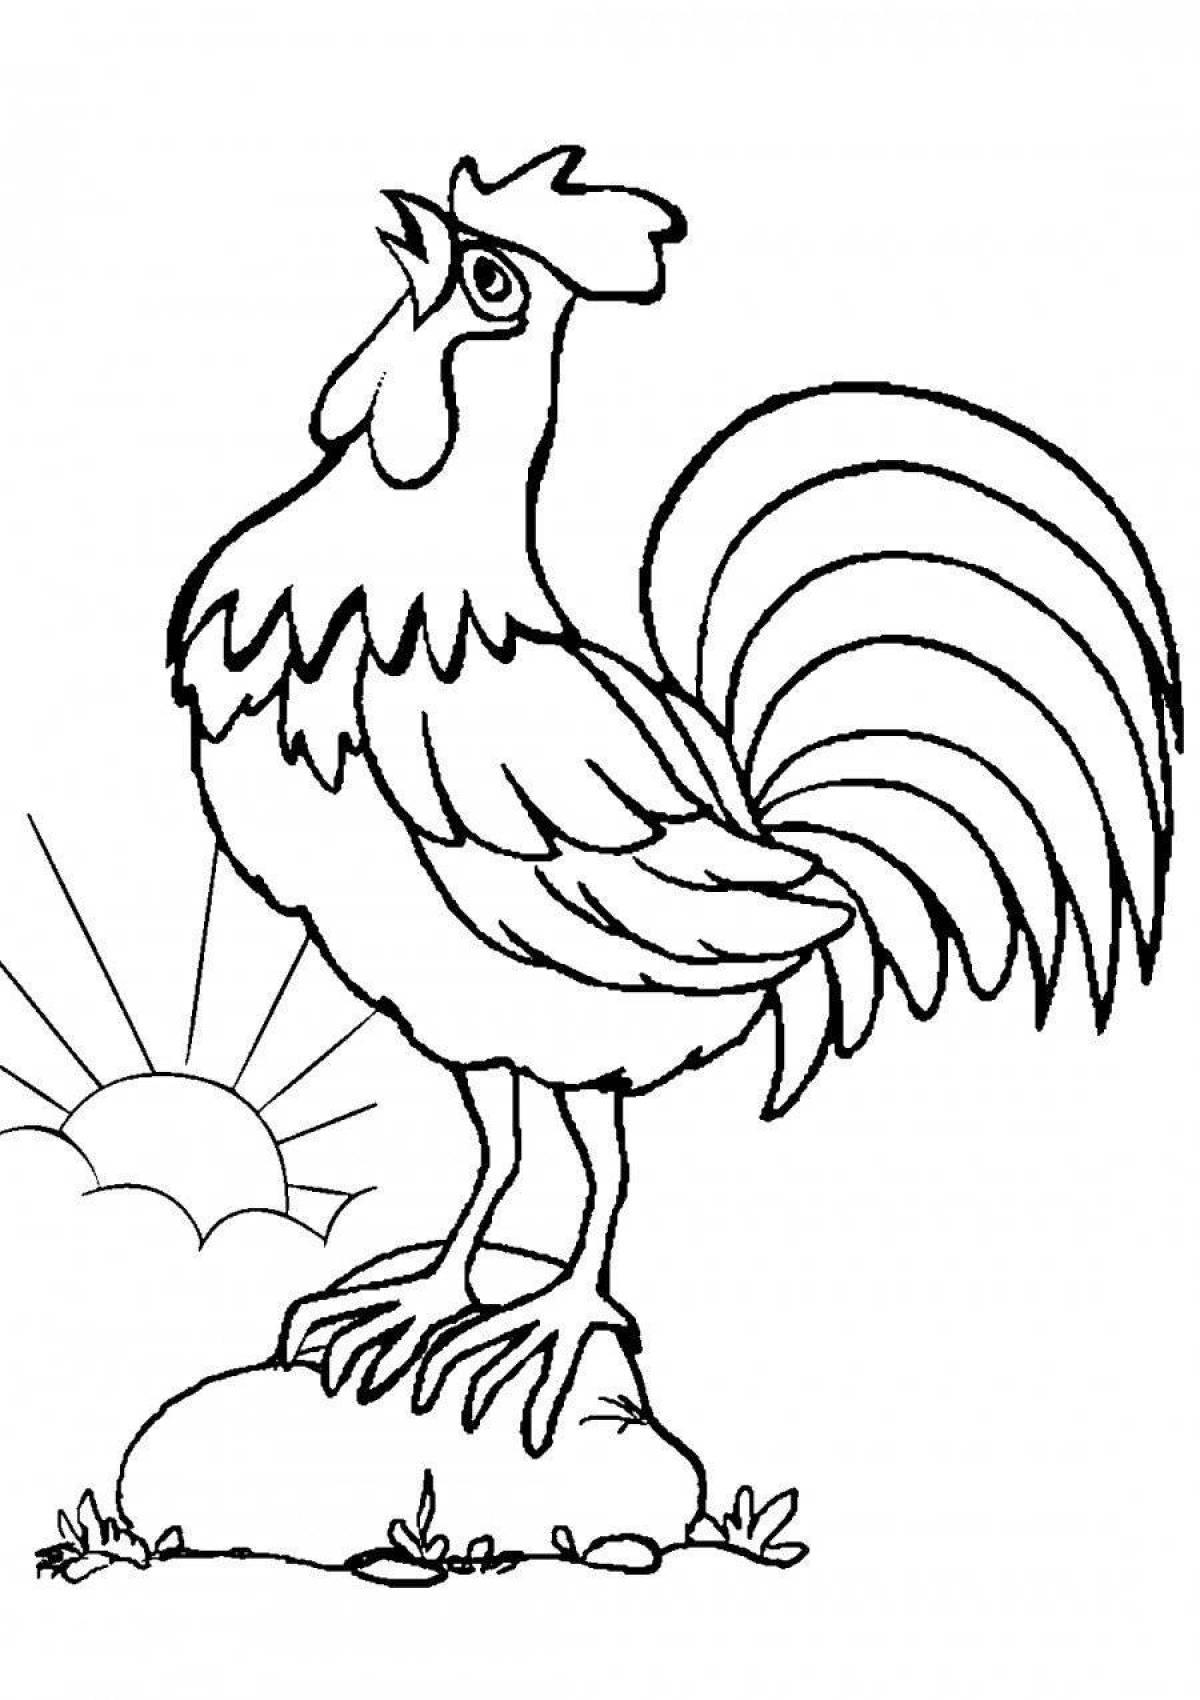 Humorous coloring rooster